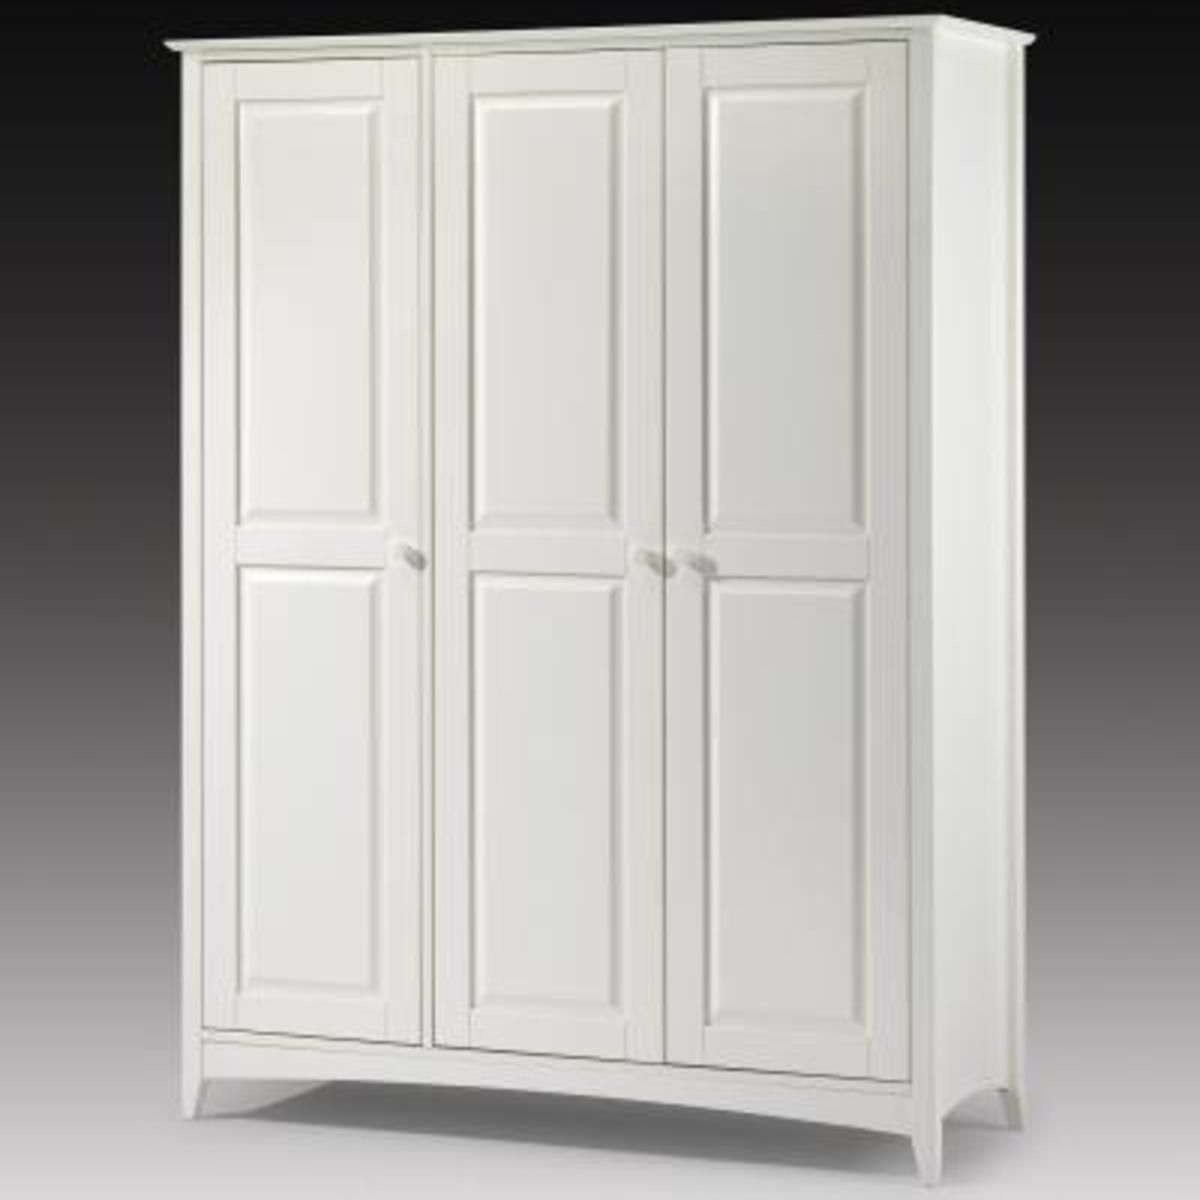 Affordable Wardrobe In White Lacquer |2 Door Wardrobe | Robinsons Beds With 3 Door White Wardrobes (View 16 of 20)